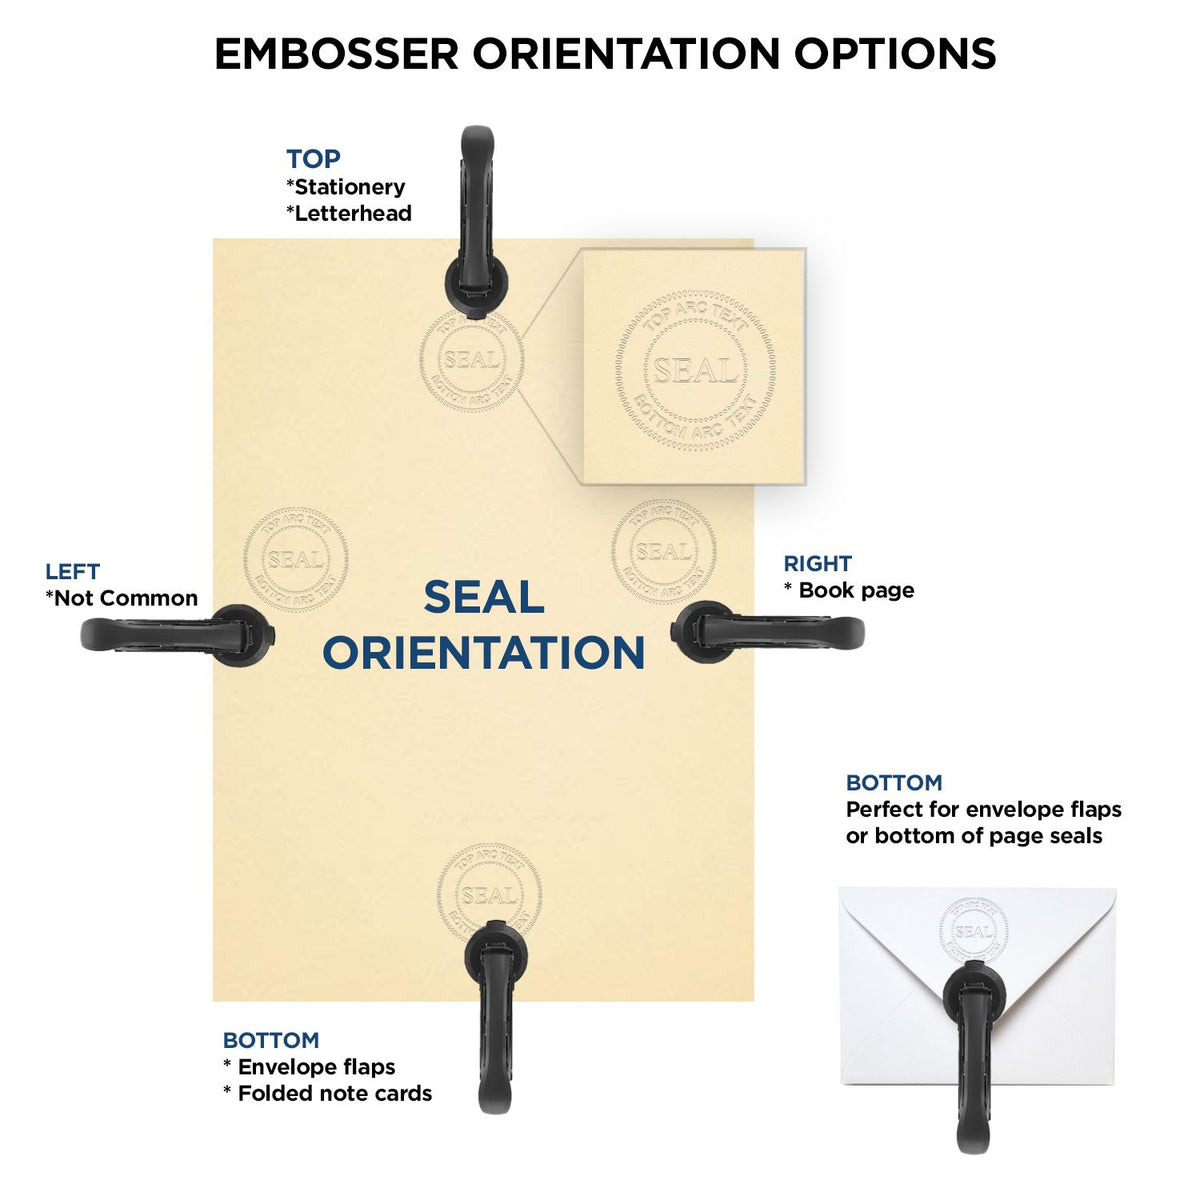 An infographic for the State of Florida Extended Long Reach Geologist Seal showing embosser orientation, this is showing examples of a top, bottom, right and left insert.